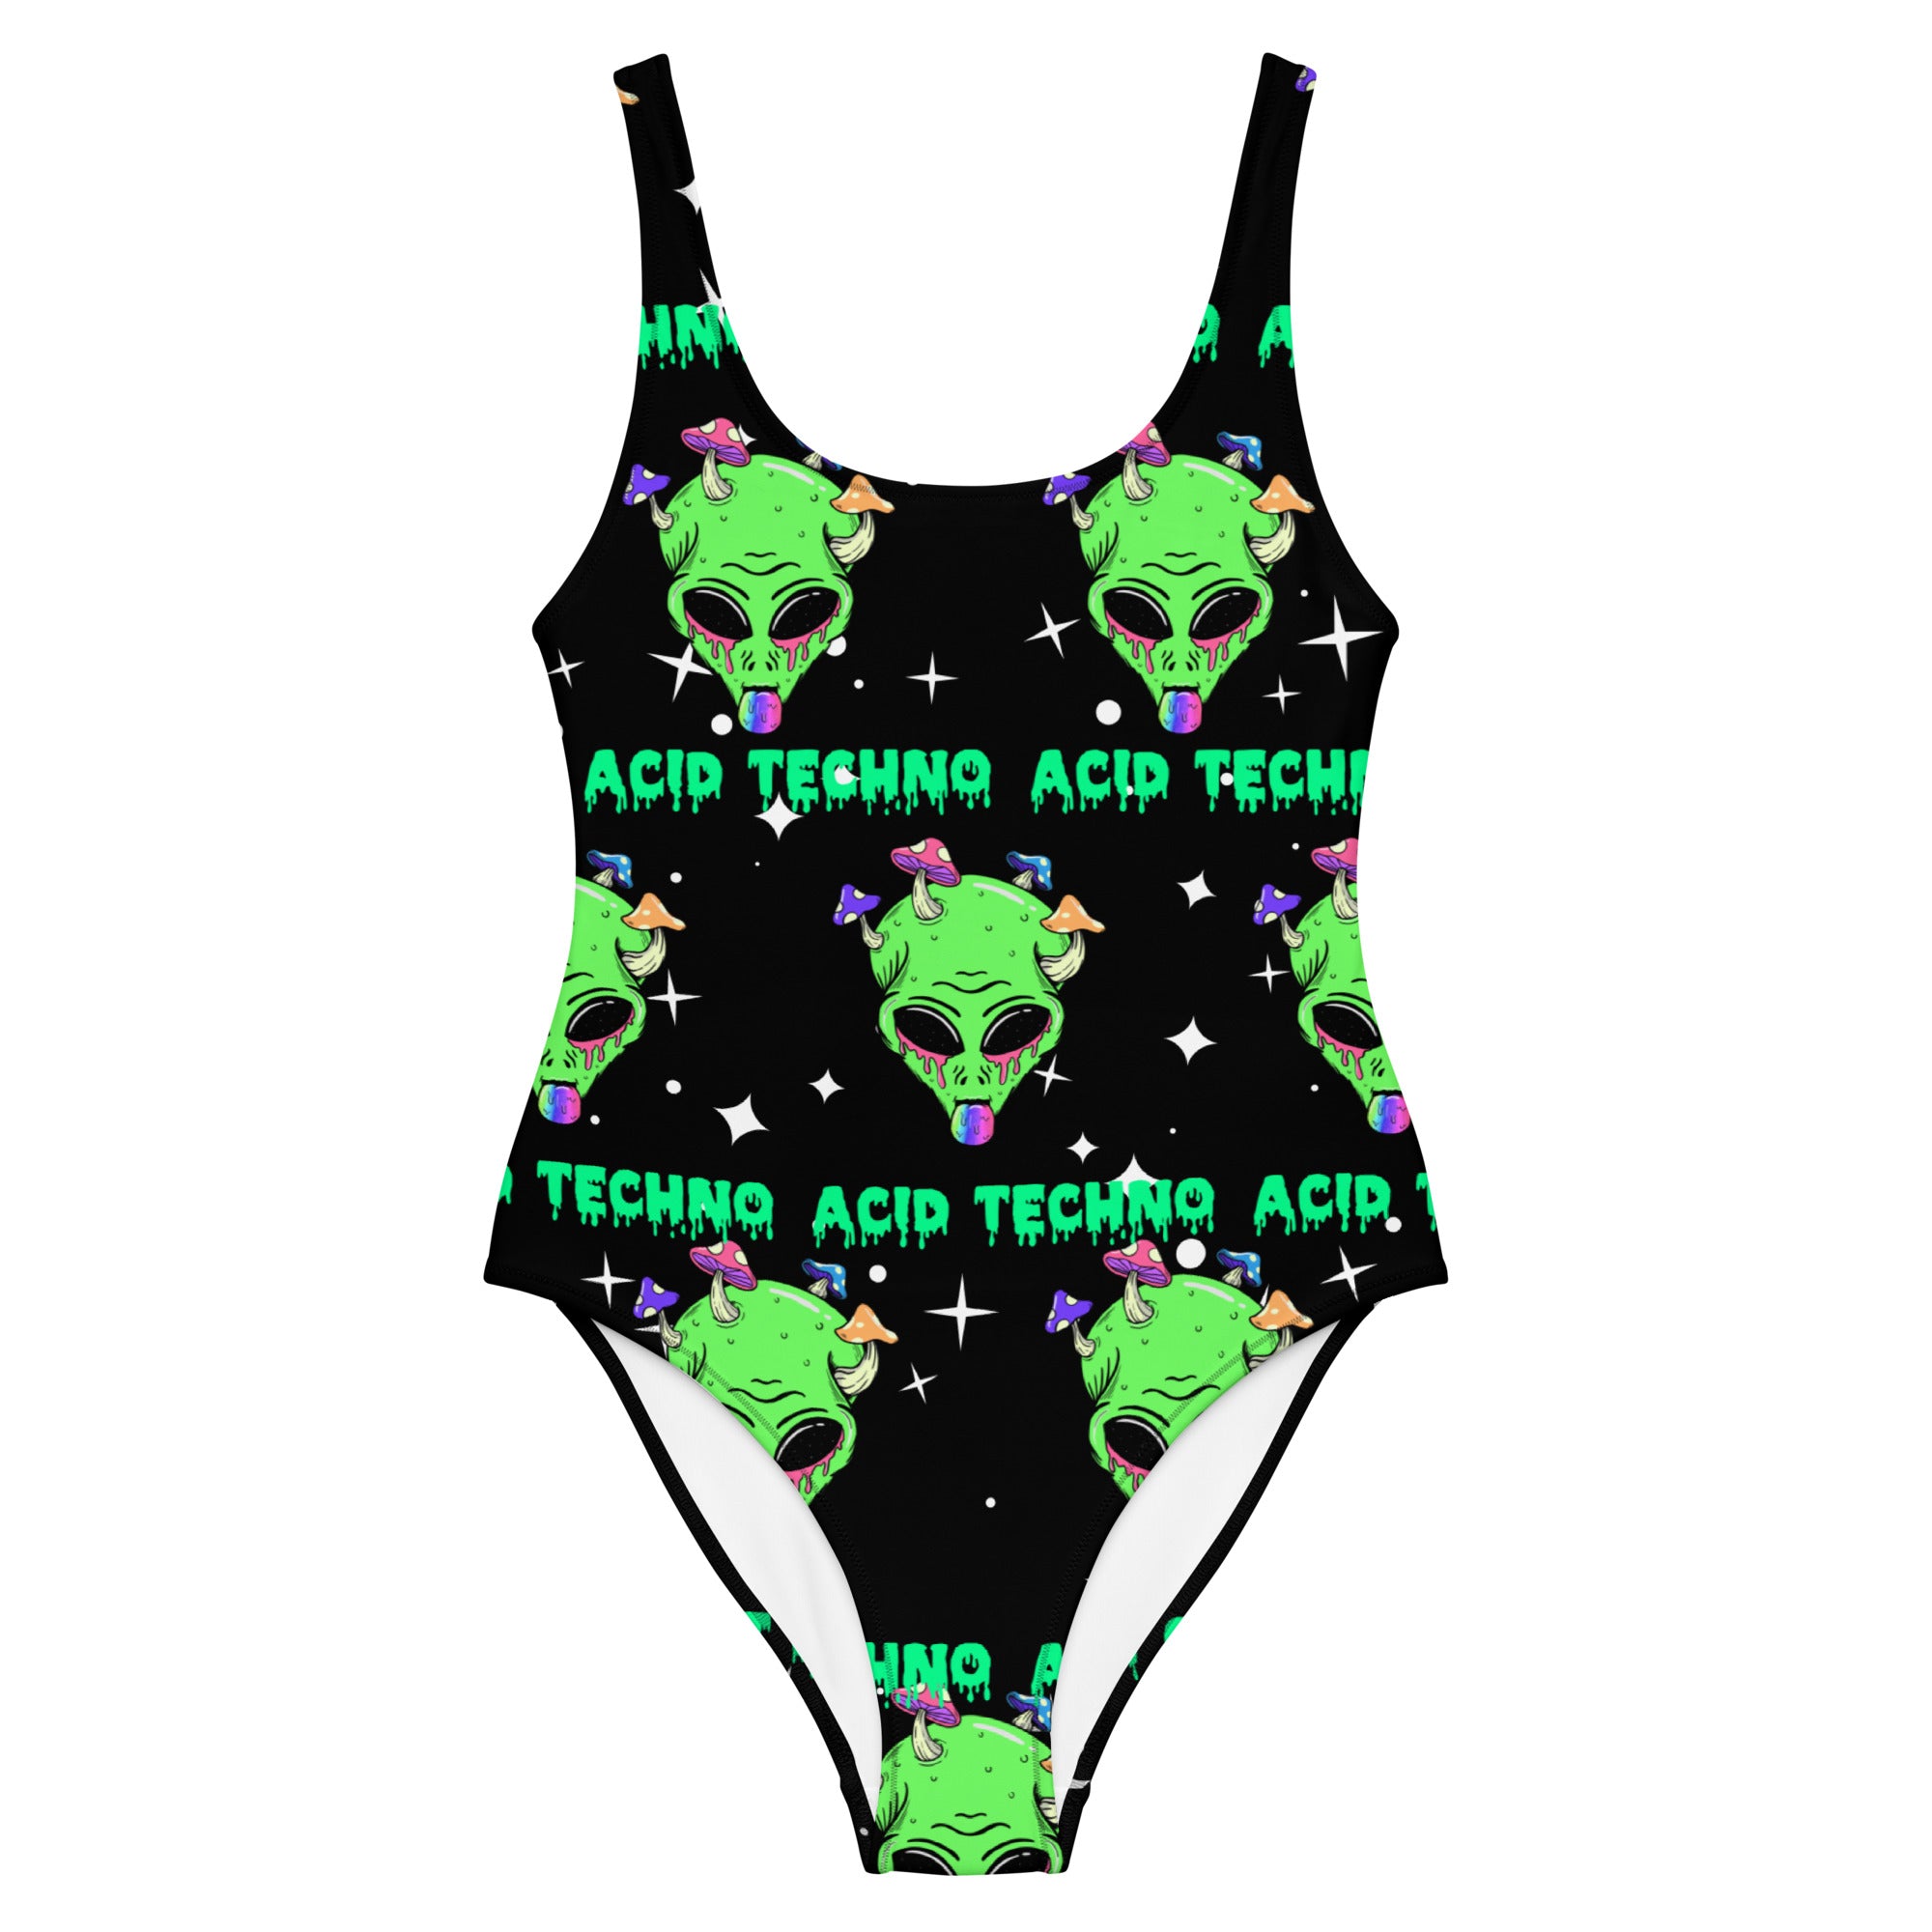 This BLACK ACID TECHNO RAVE BODYSUIT is the perfect choice for any festival or rave. Made from comfortable, high-quality fabric, this bodysuit allows you to cut a stylish figure while you dance the night away. Its black vibrant alien techno design is sure to turn heads.